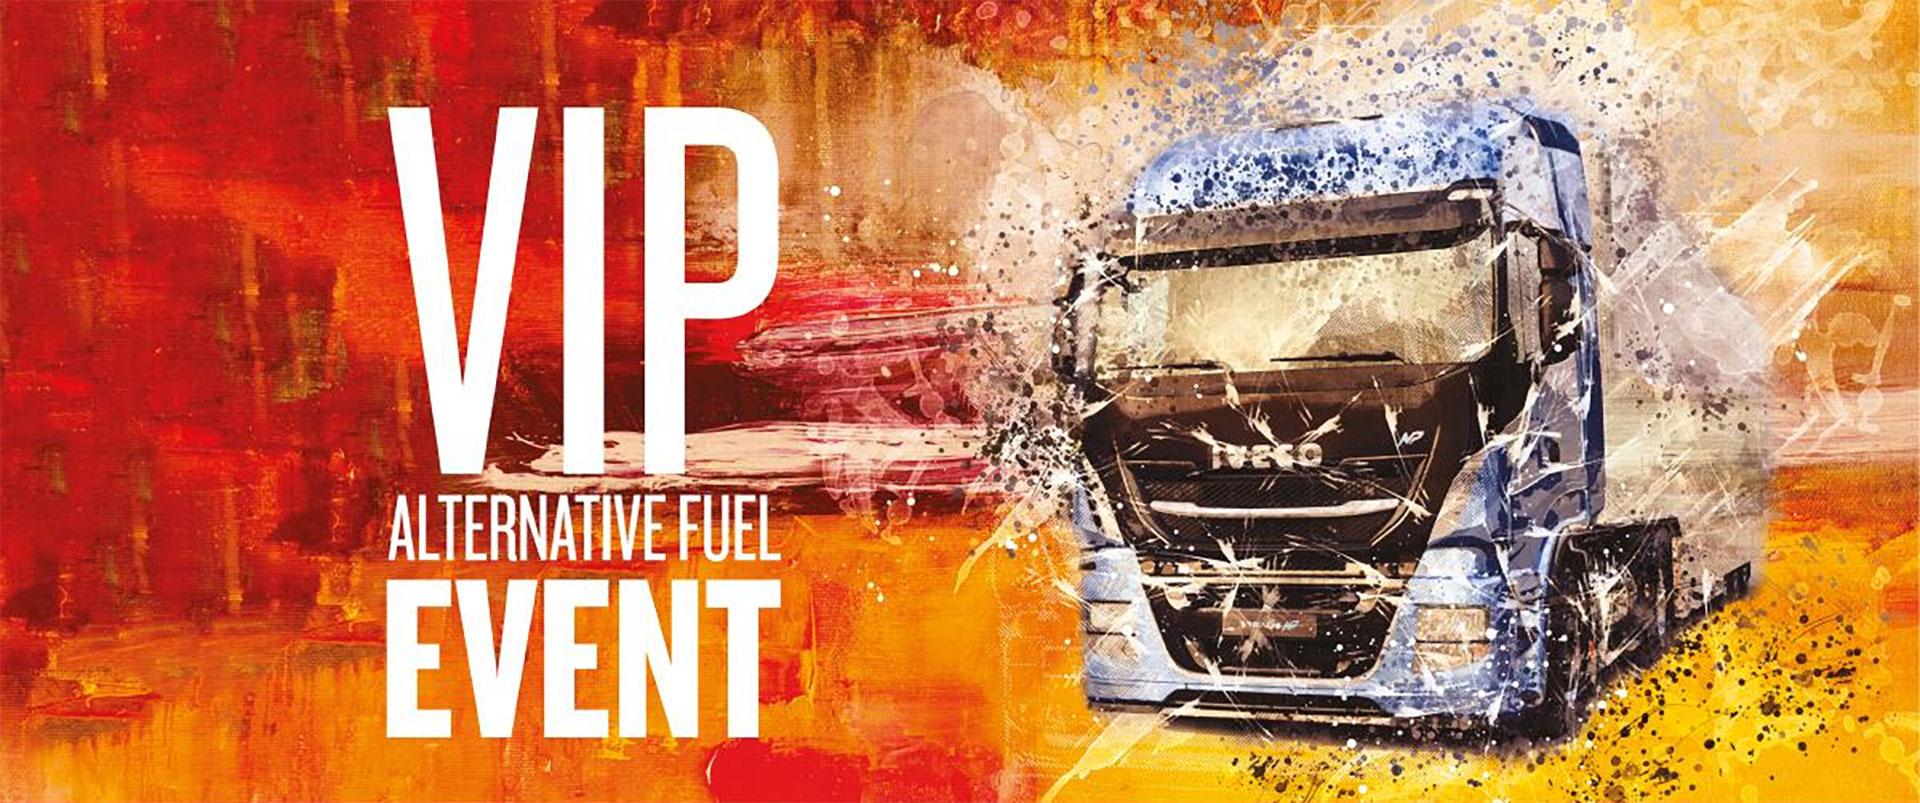 Are you interested in Alternative Fuels? 